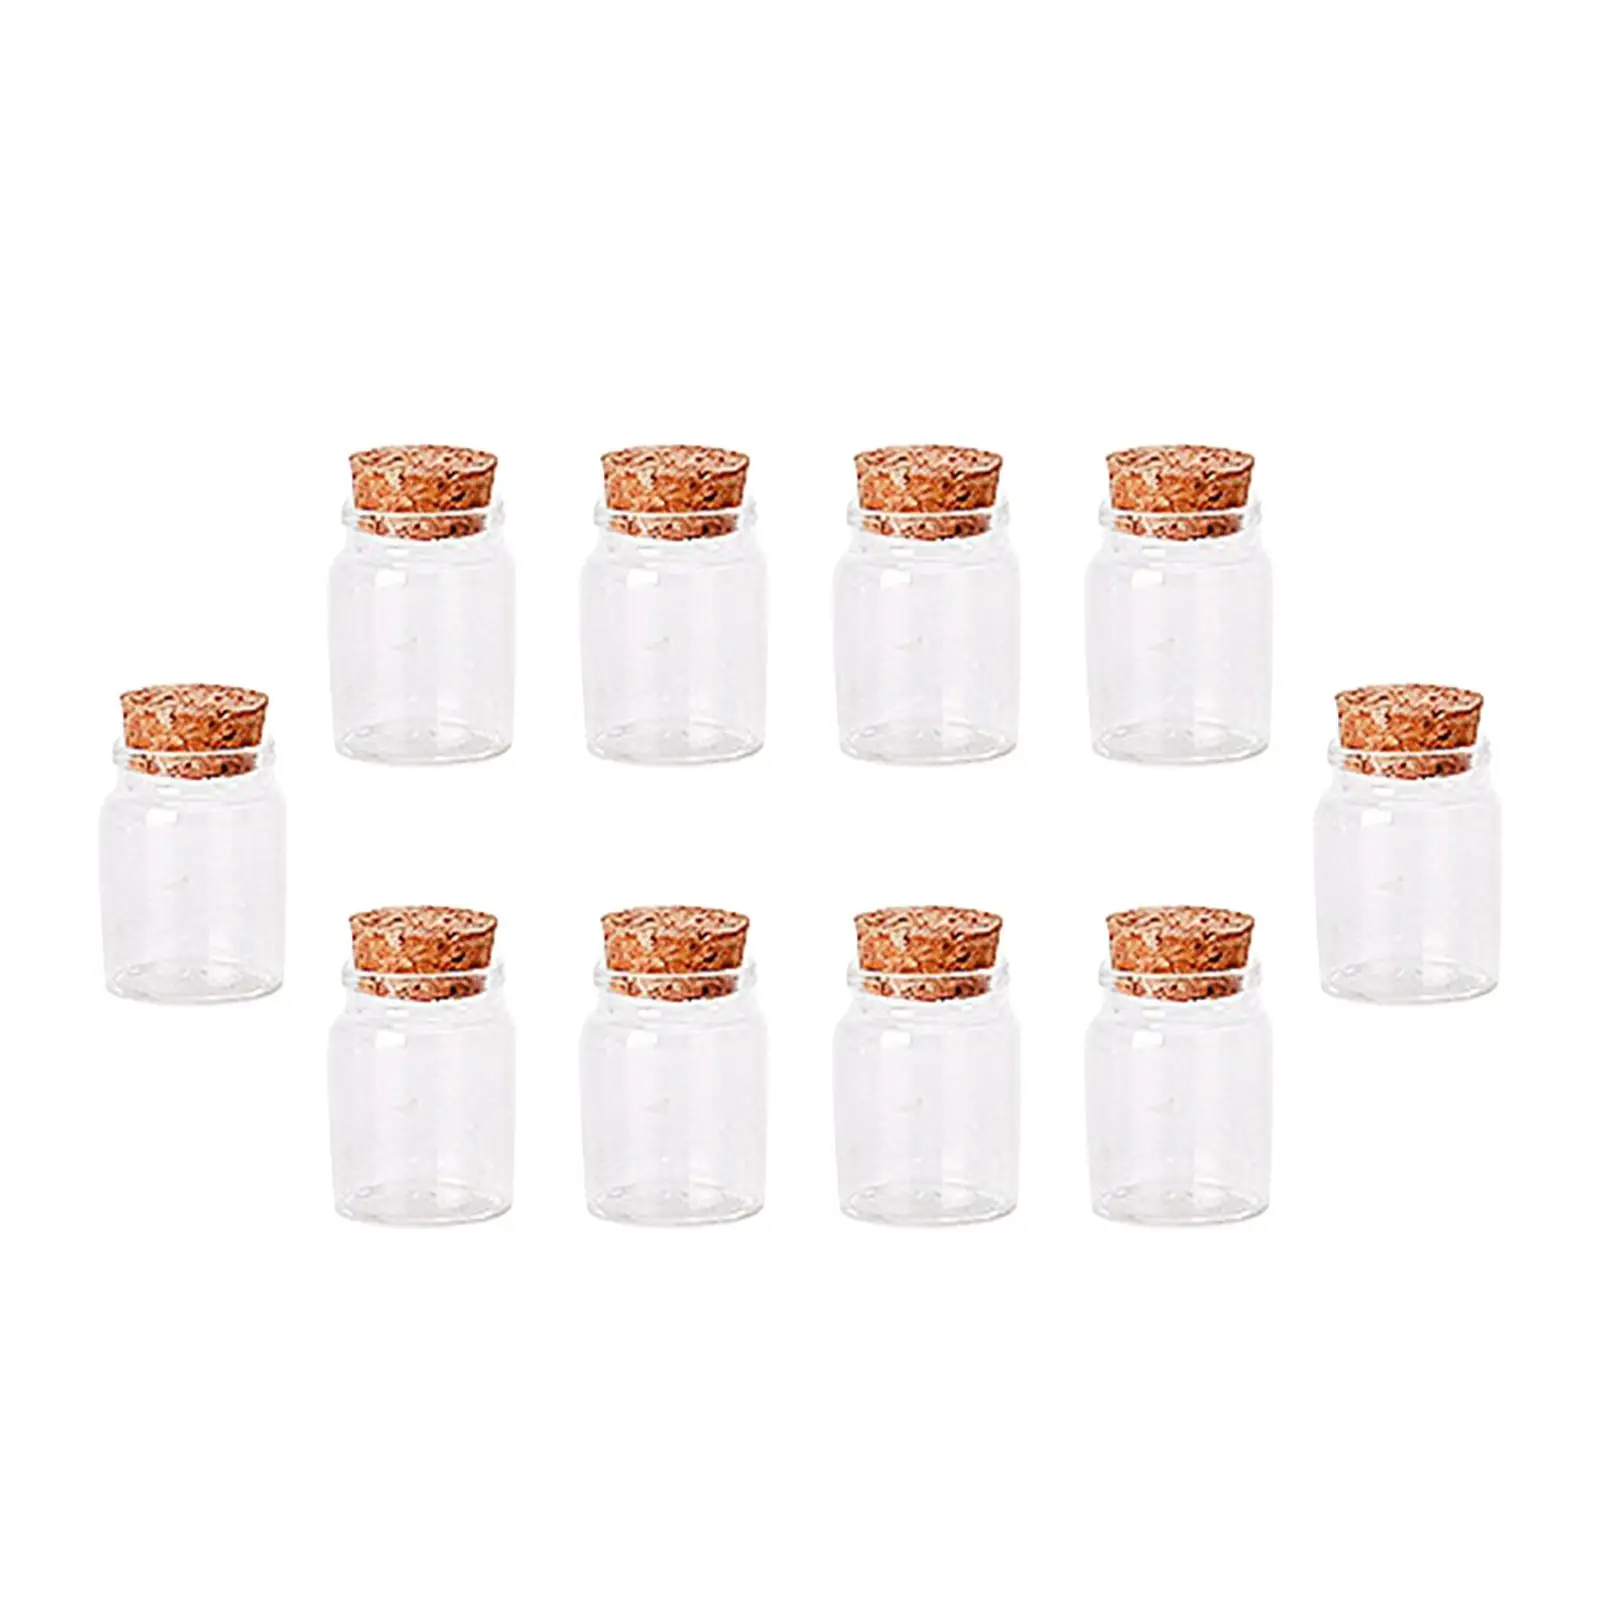 10Pcs Drifting Bottles Small Glass Jars Empty Container Wish Glass Jars Mini Glass Bottle for Wedding Favors Home Decoration